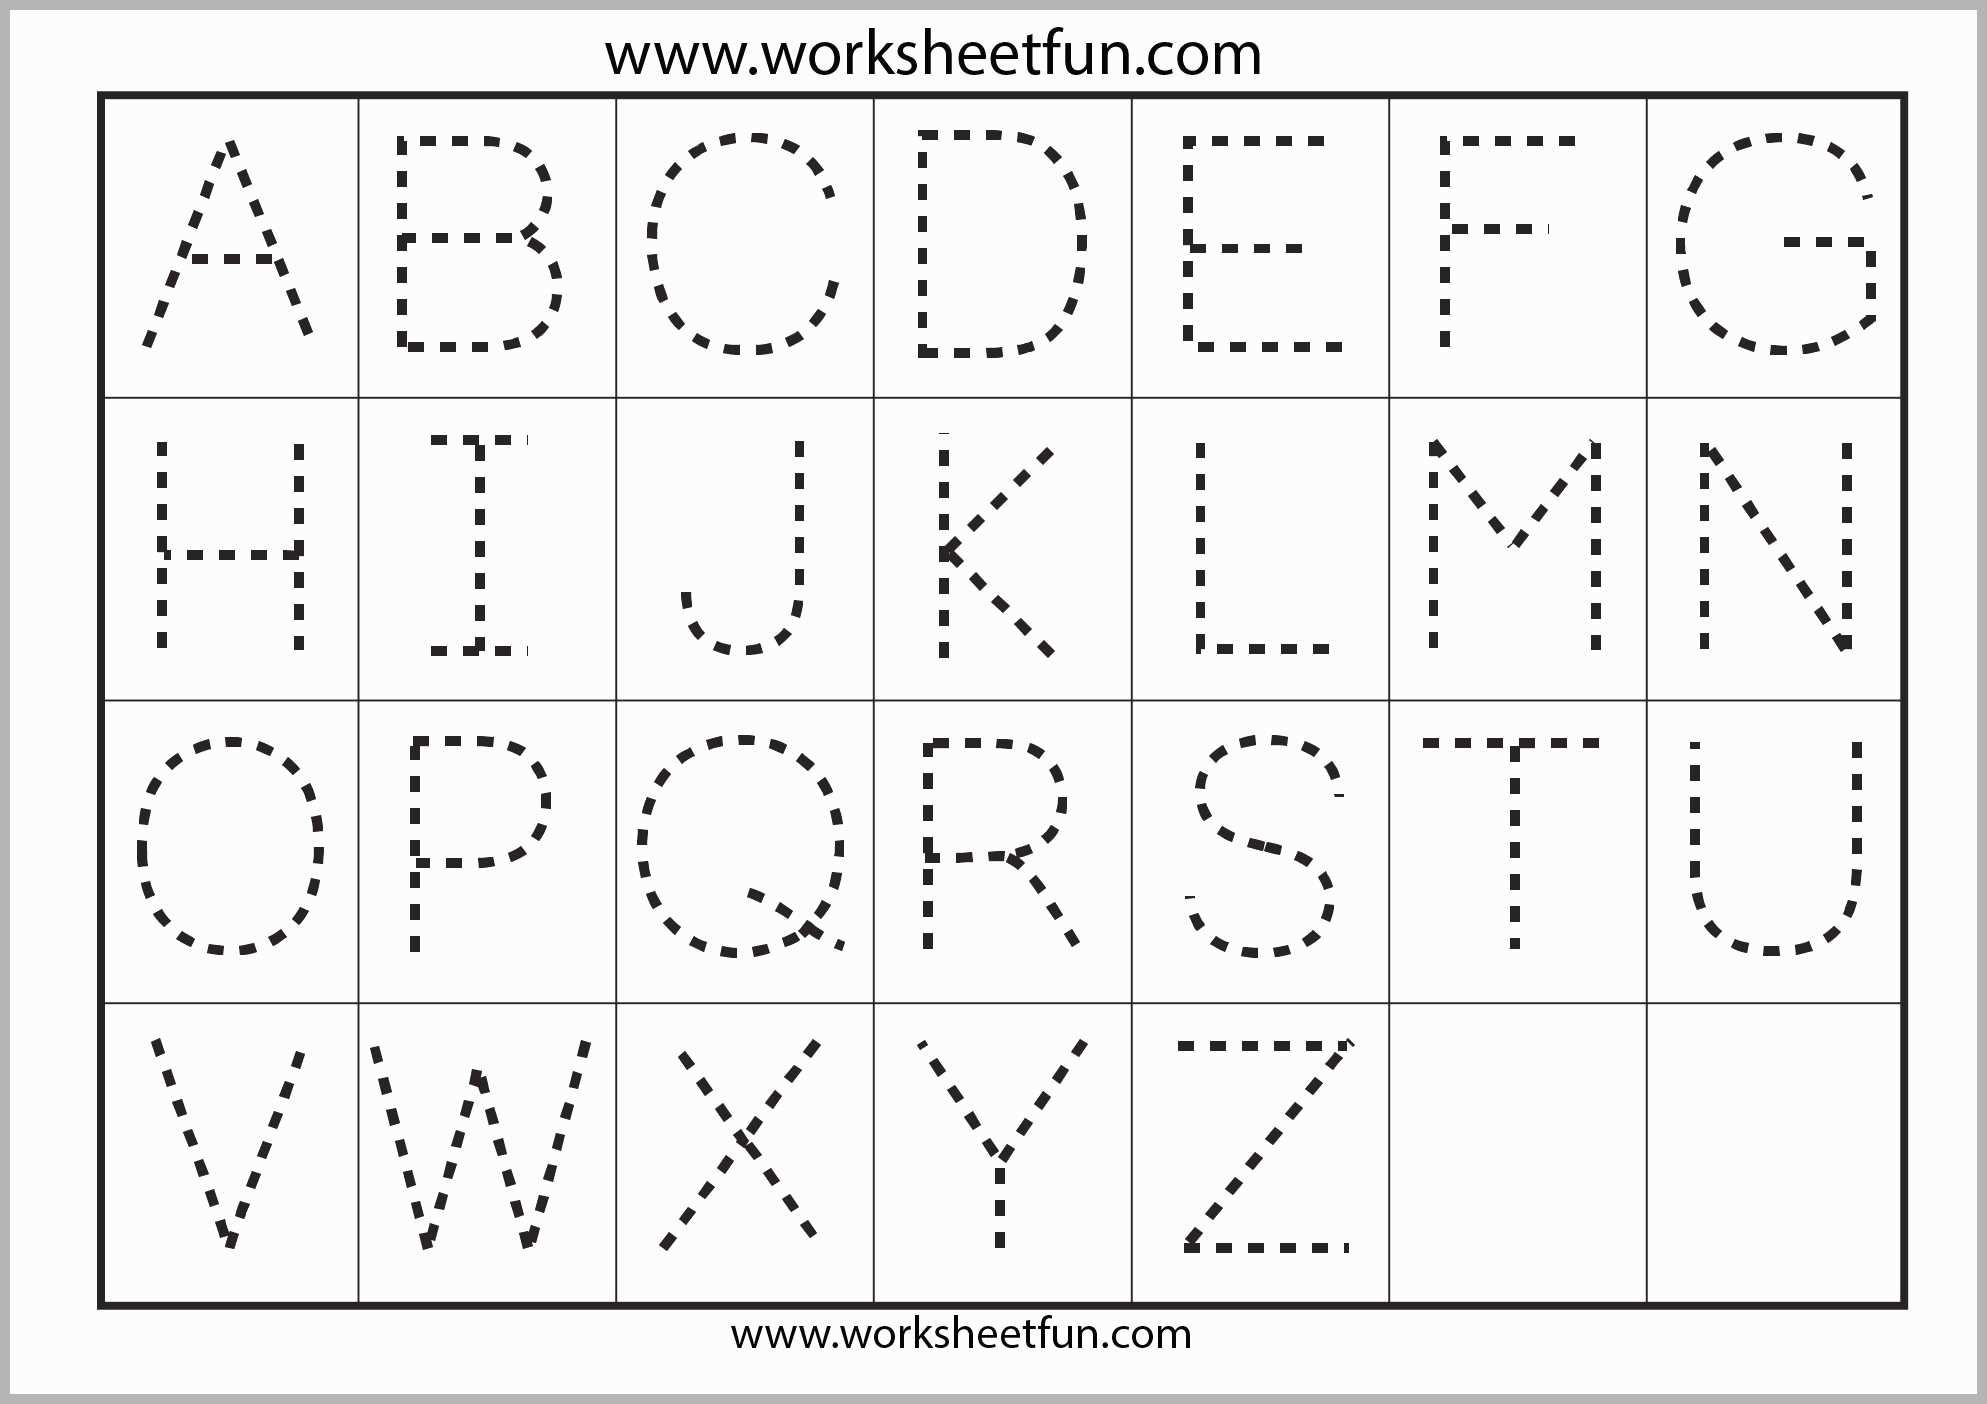 Kids Worksheets Reschool Df Tracing Letter Free Rintable pertaining to Letter B Worksheets Pdf